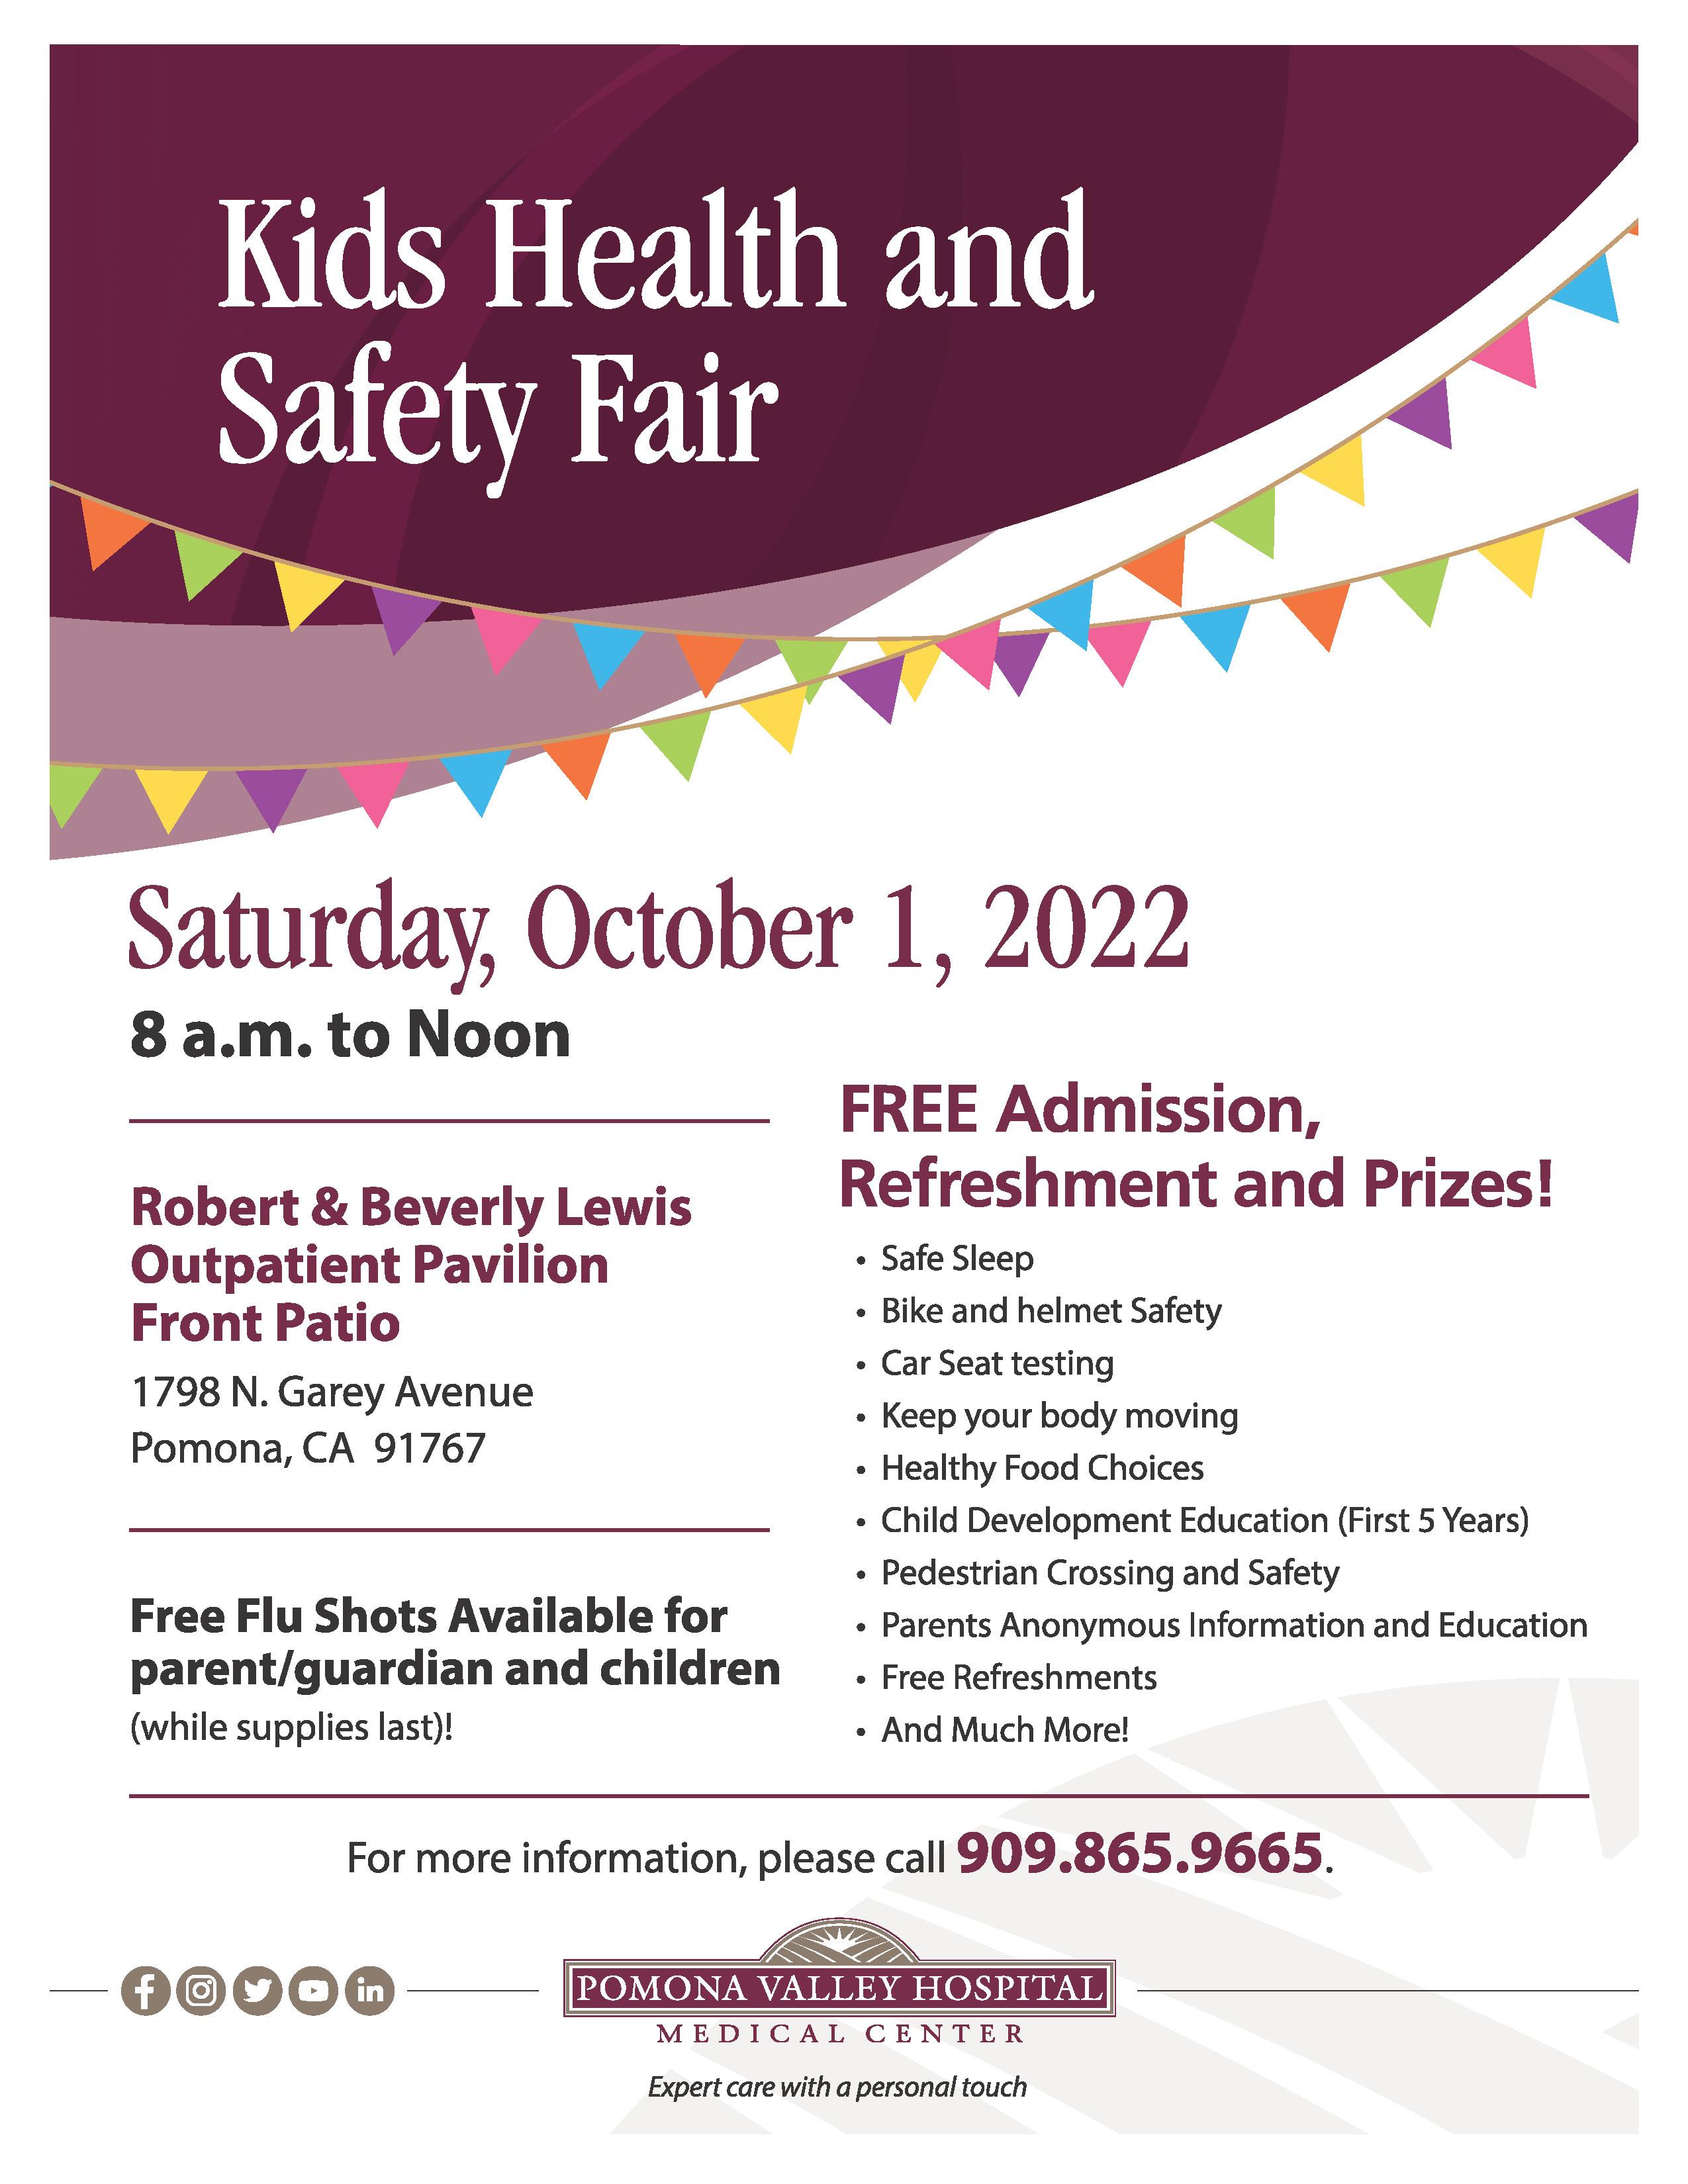 Kids Health and Safety Fair